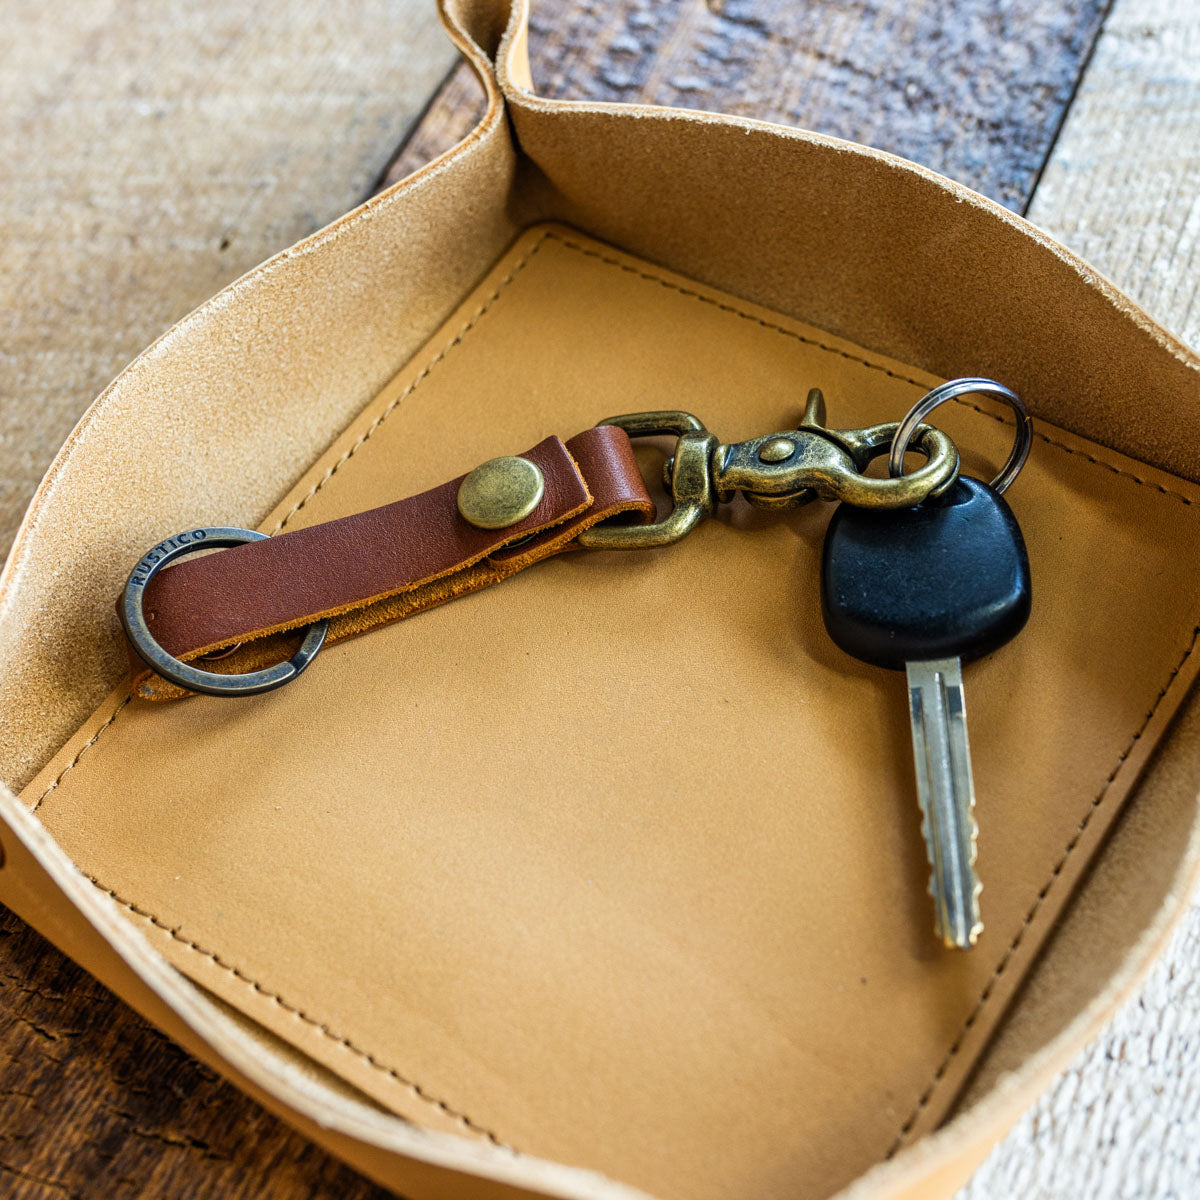 Small Leather Key Wallet, Key Holder with Hanging Buckle Hooks for